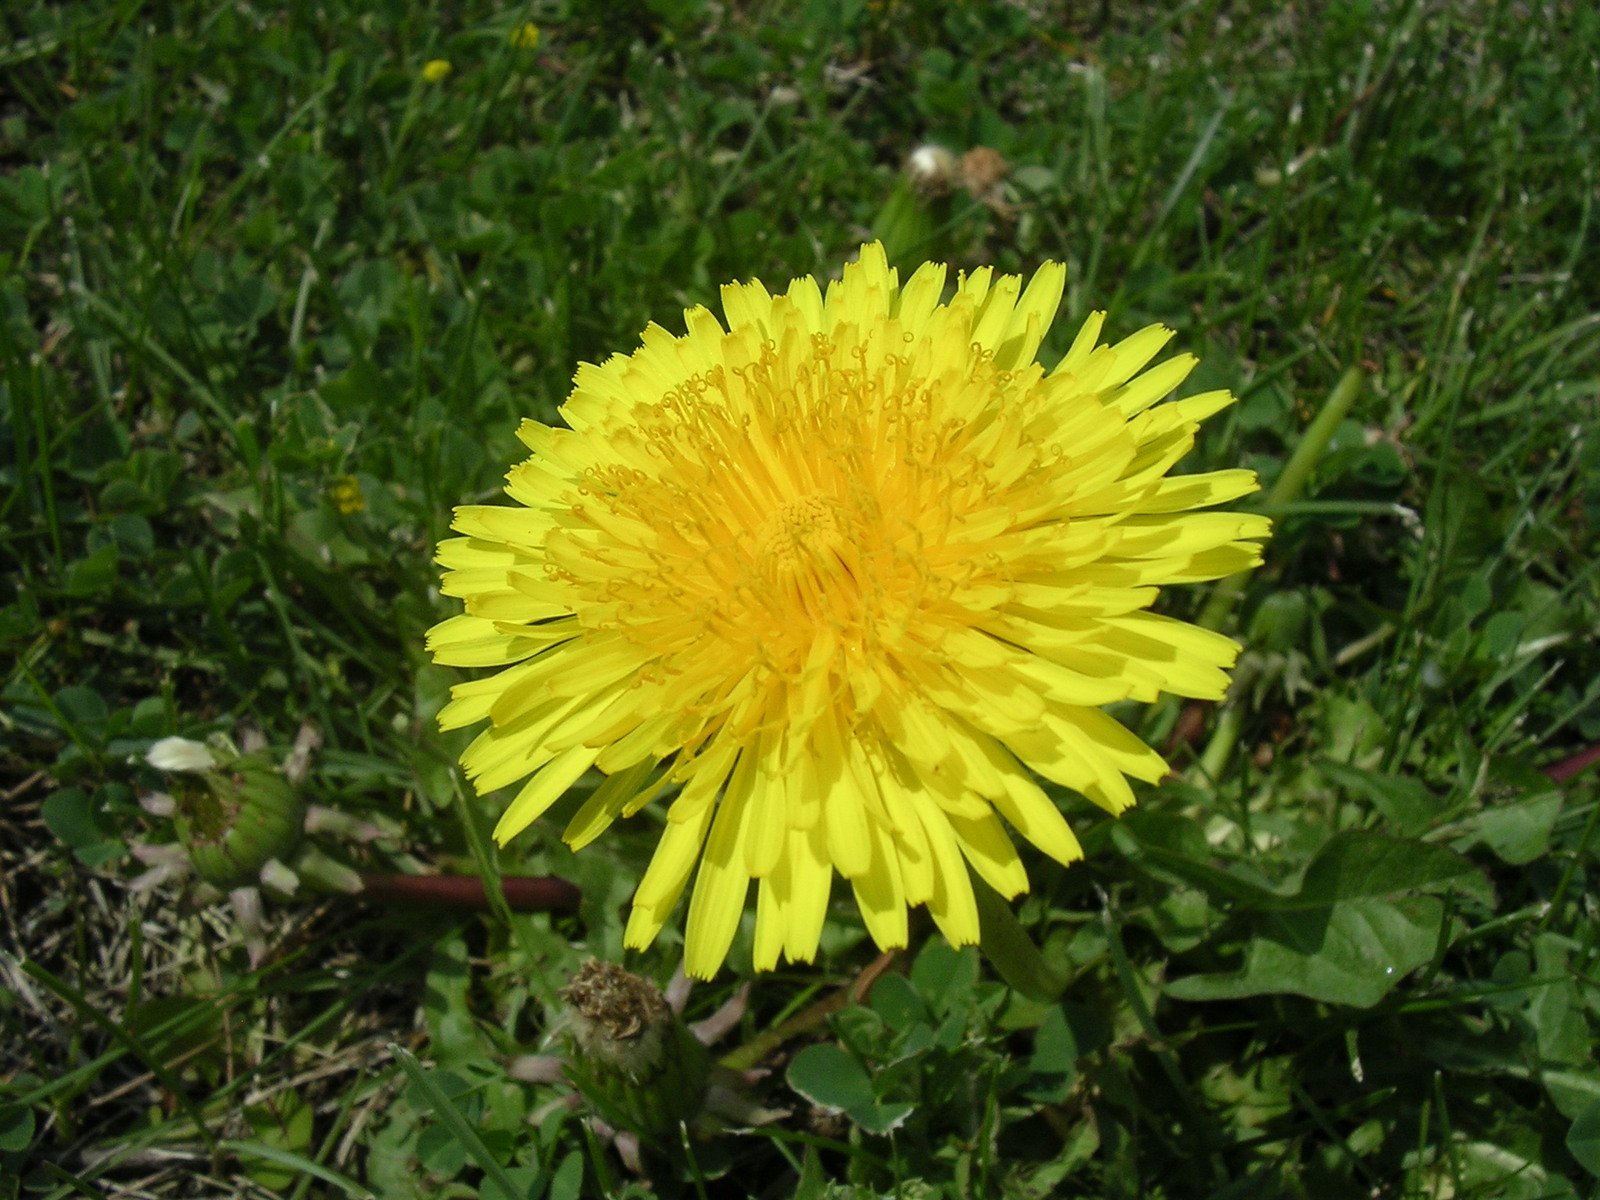 there is a very yellow flower in the grass